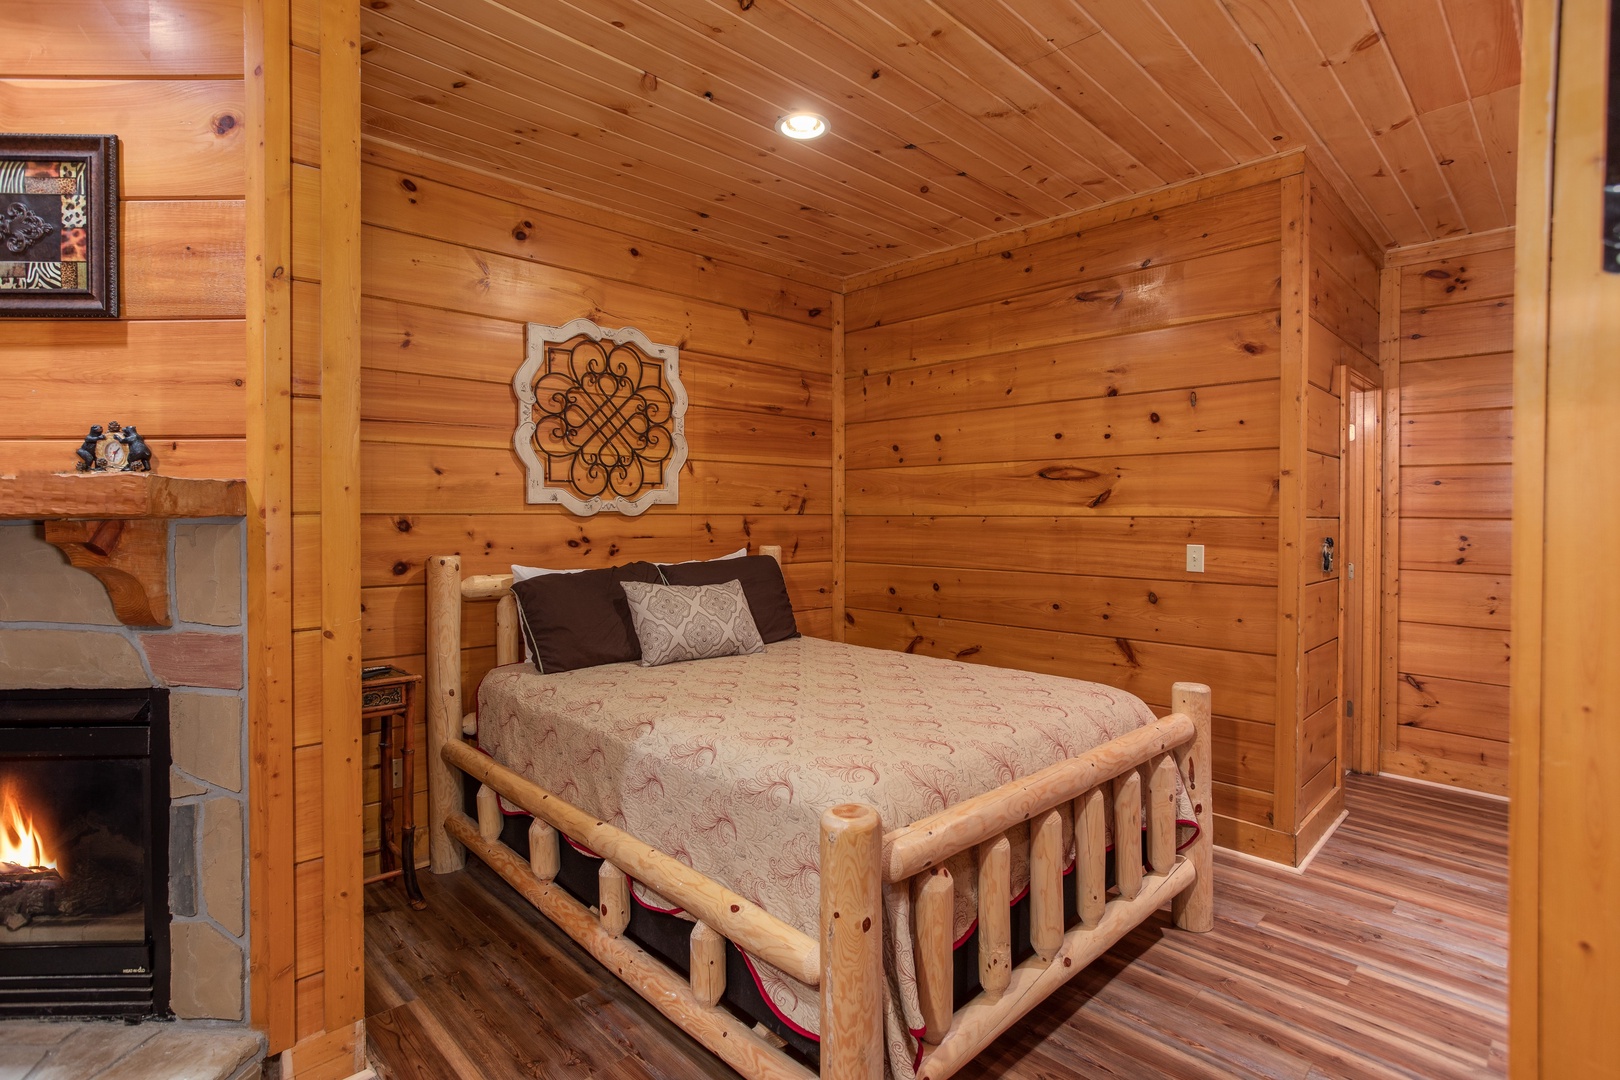 Bedroom with a log bed at Starry Starry Night #725, a 2 bedroom cabin rental located in Pigeon Forge